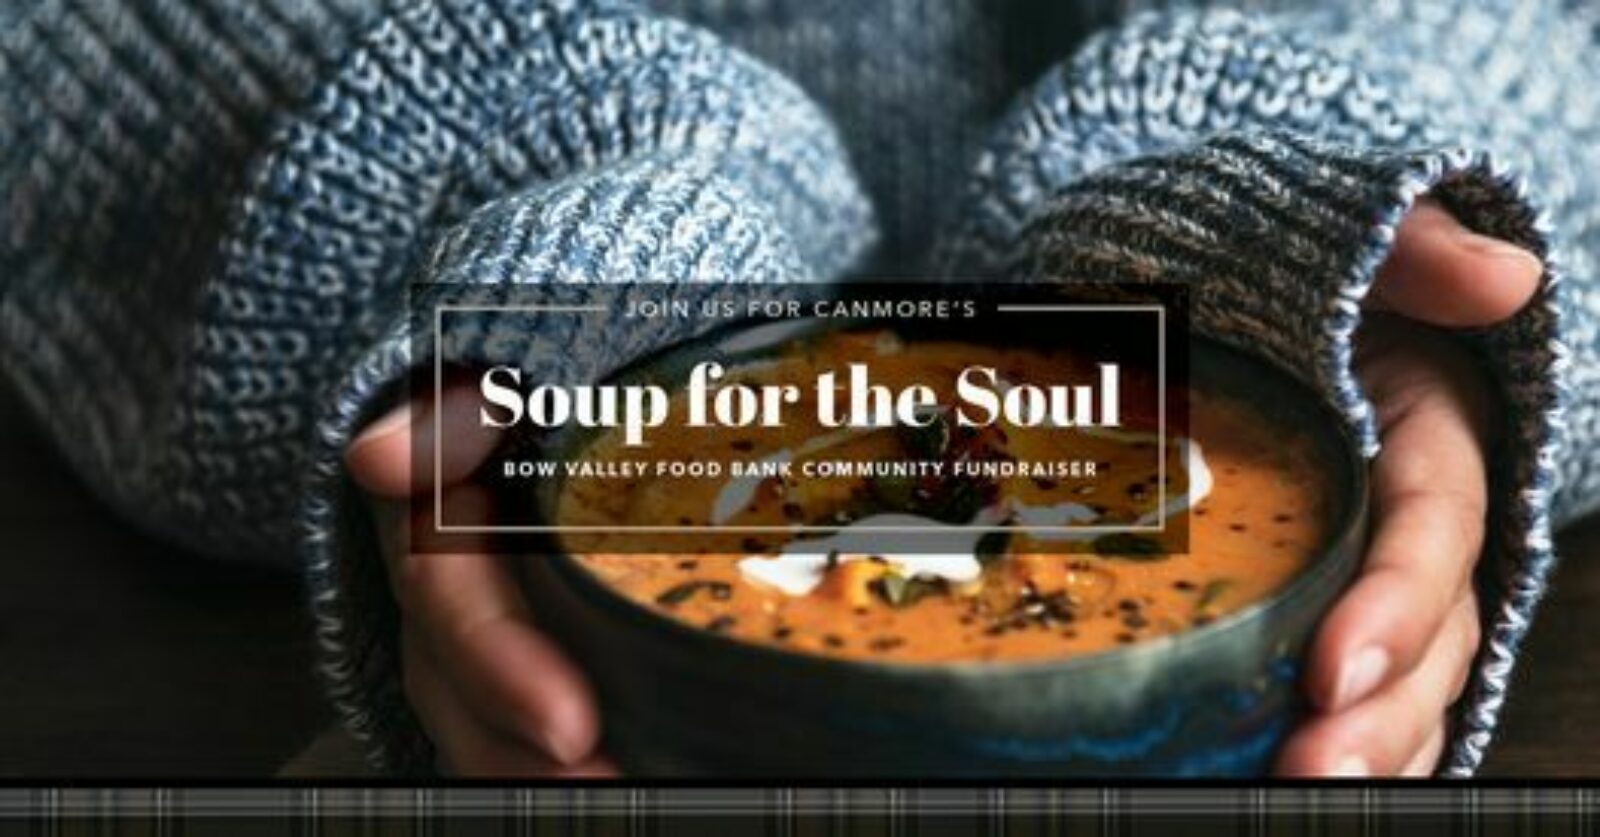 The Malcom Soup for the Soul